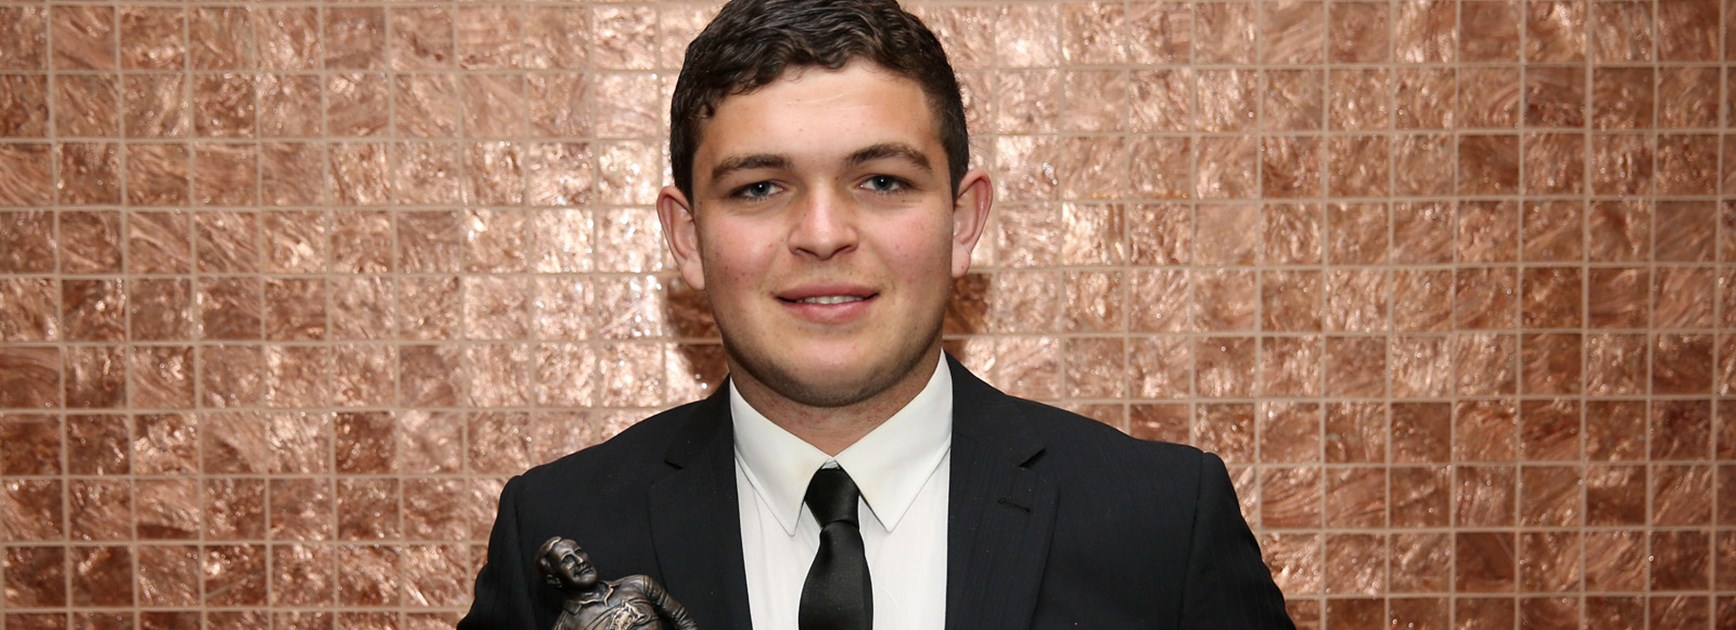 Ashley Taylor won the 2015 Holden Cup Player of the Year award.